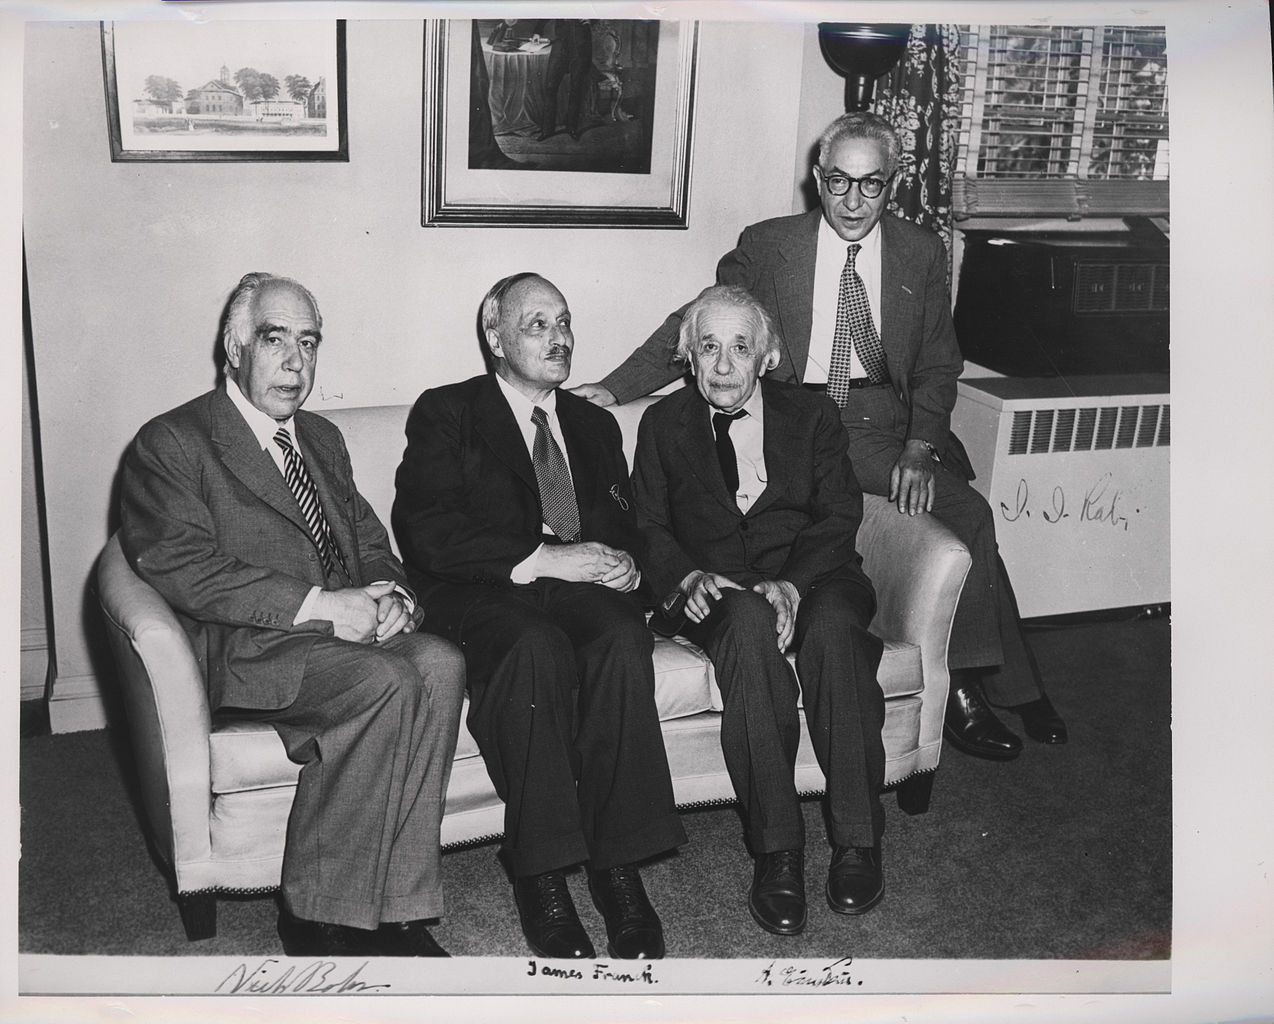 A signed portrait of Niels Bohr, James Franck, Albert Einstein, and Isidor I. Rabi